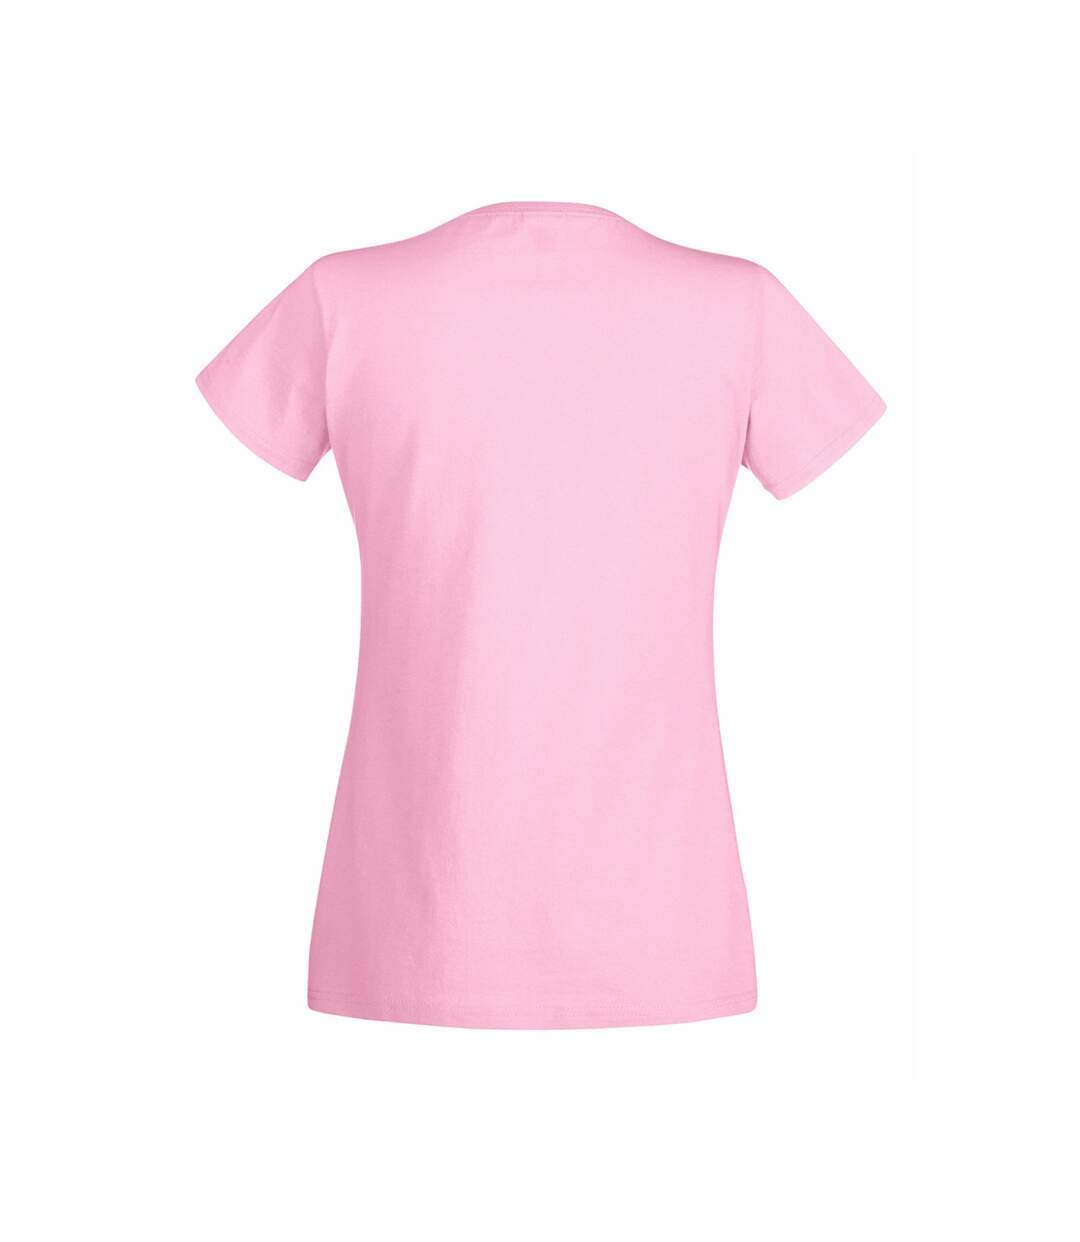 Fruit Of The Loom - T-shirt manches courtes - Femme (Rose clair) - UTBC1354